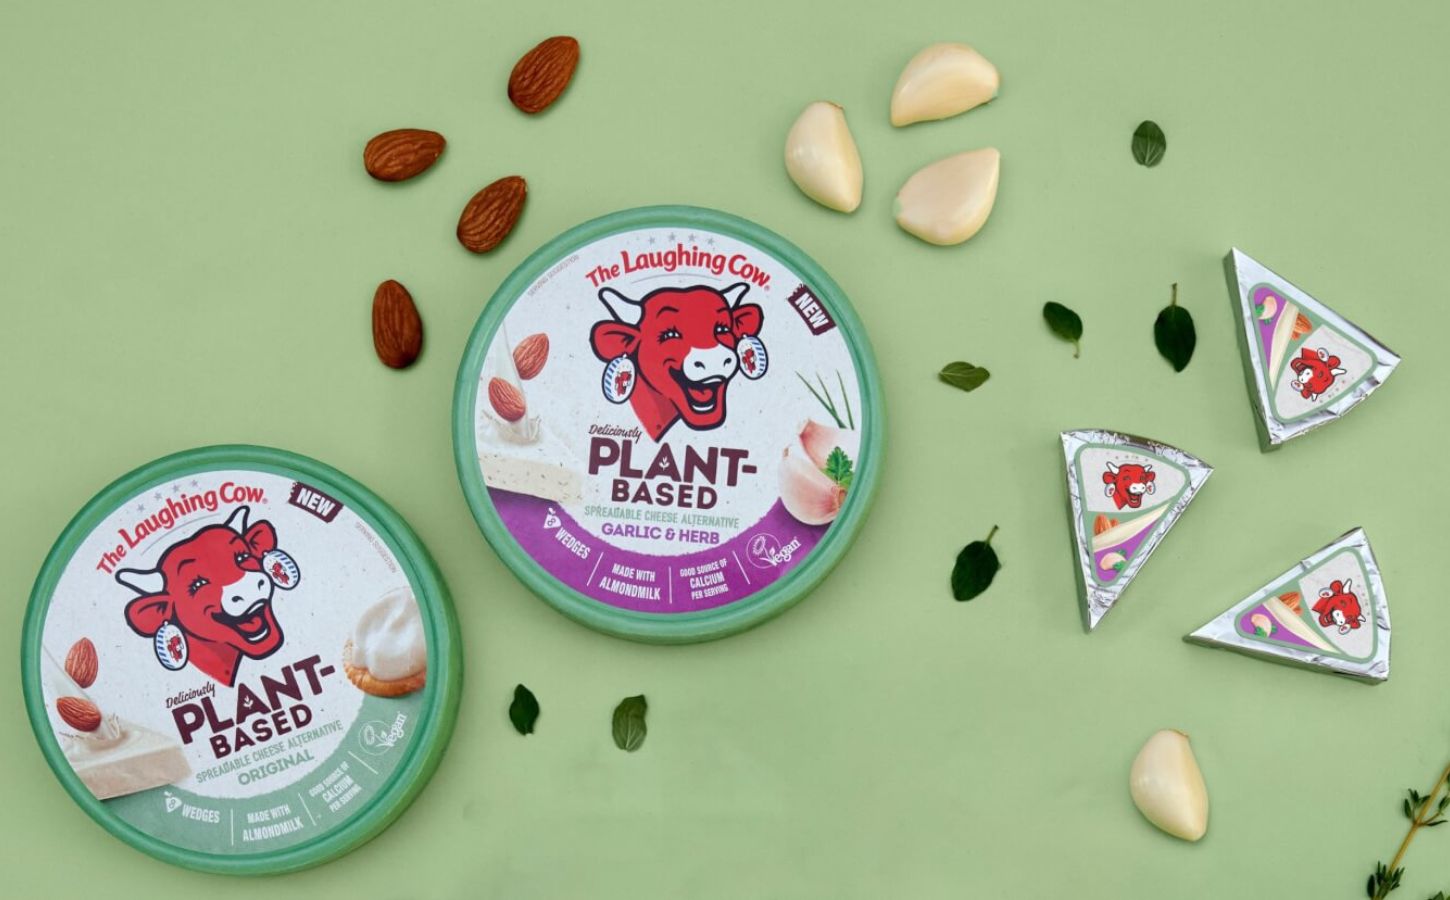 Artistic photo of vegan soft cheese from the new Laughing Cow vegan cheese range